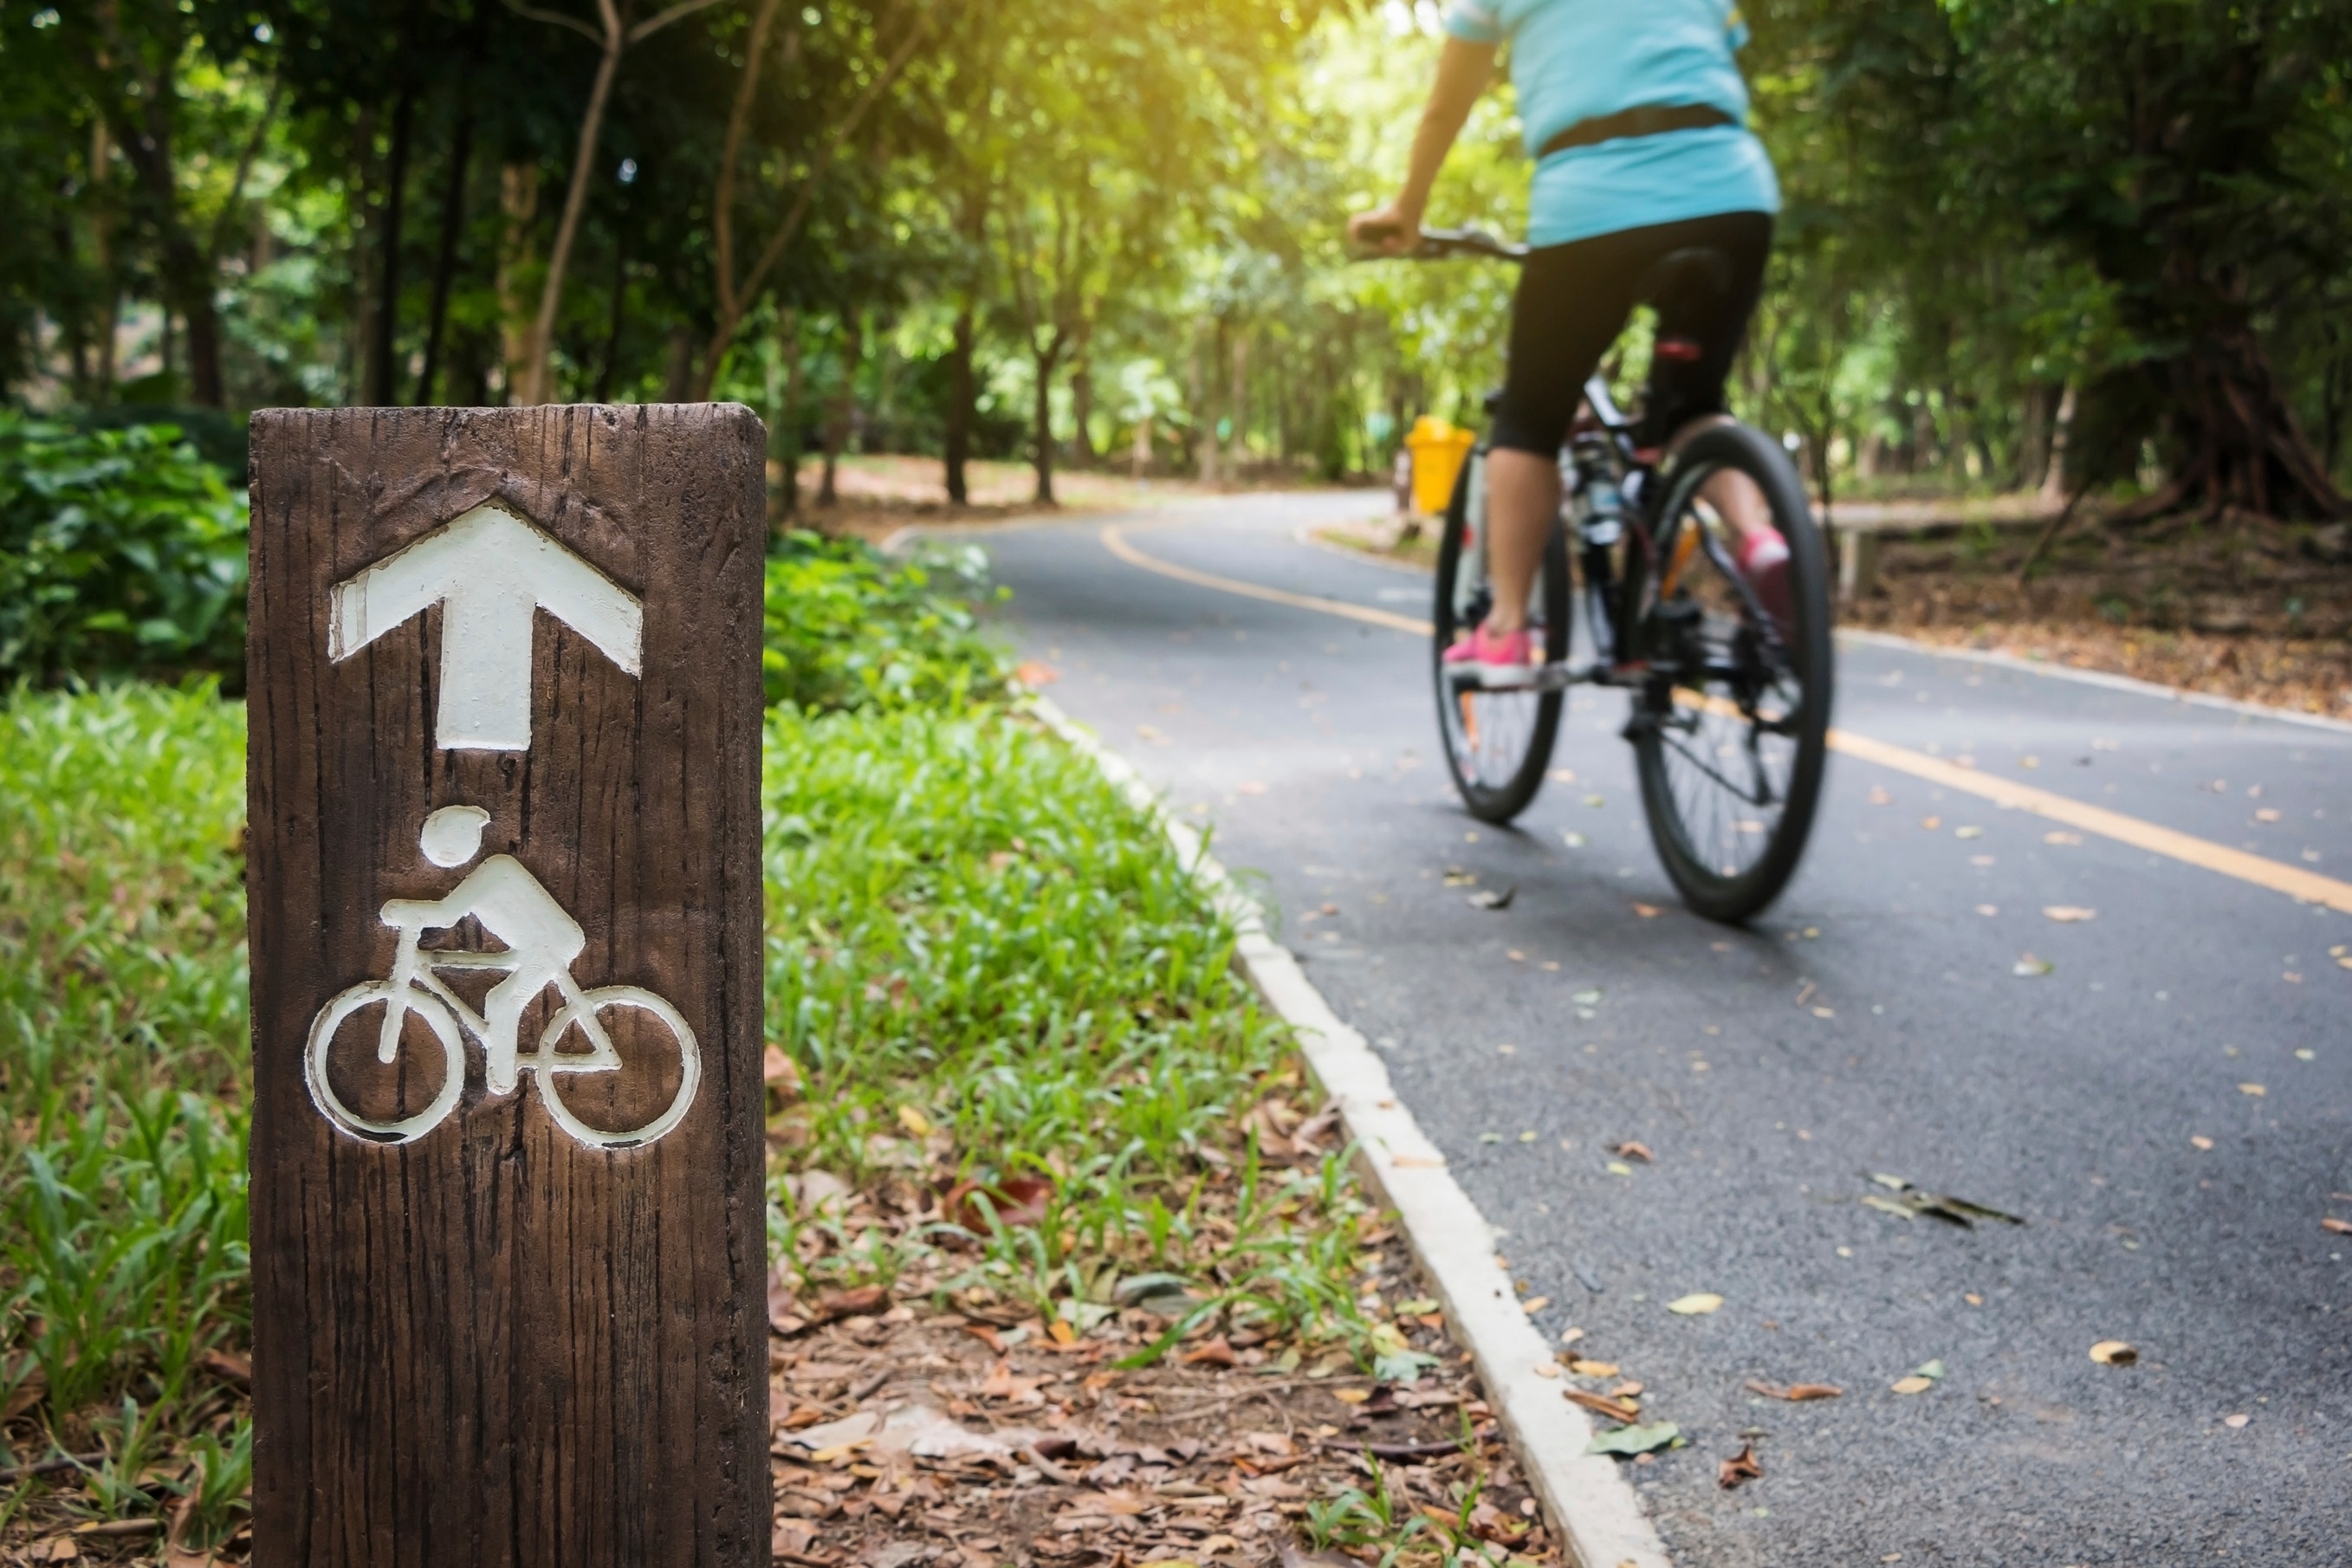 US Bicycle Route System expands with 2,903 miles of new cycling trails across 5 states